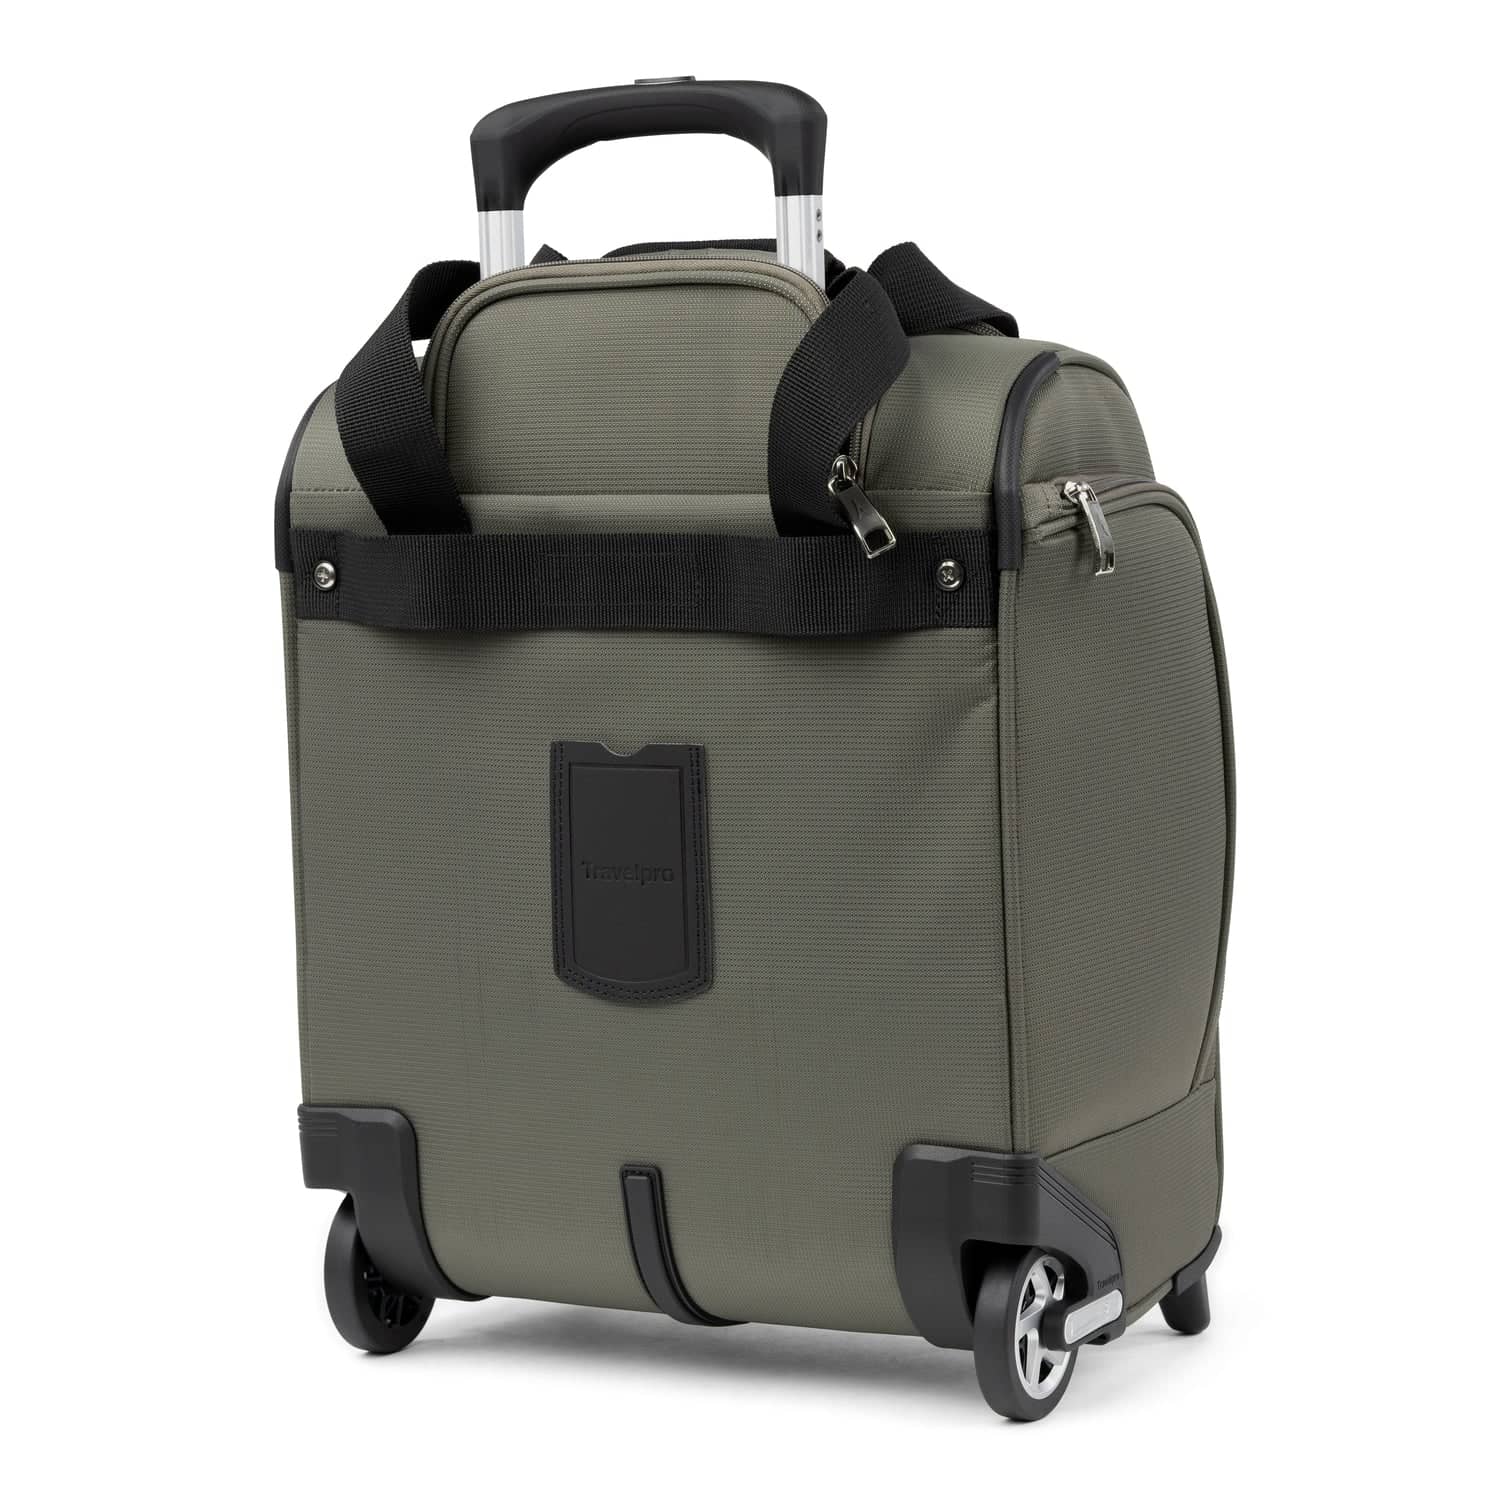 Travelpro Maxlite Air Carry-On Expandable Hardside Spinner Luggage in Metallic Silver